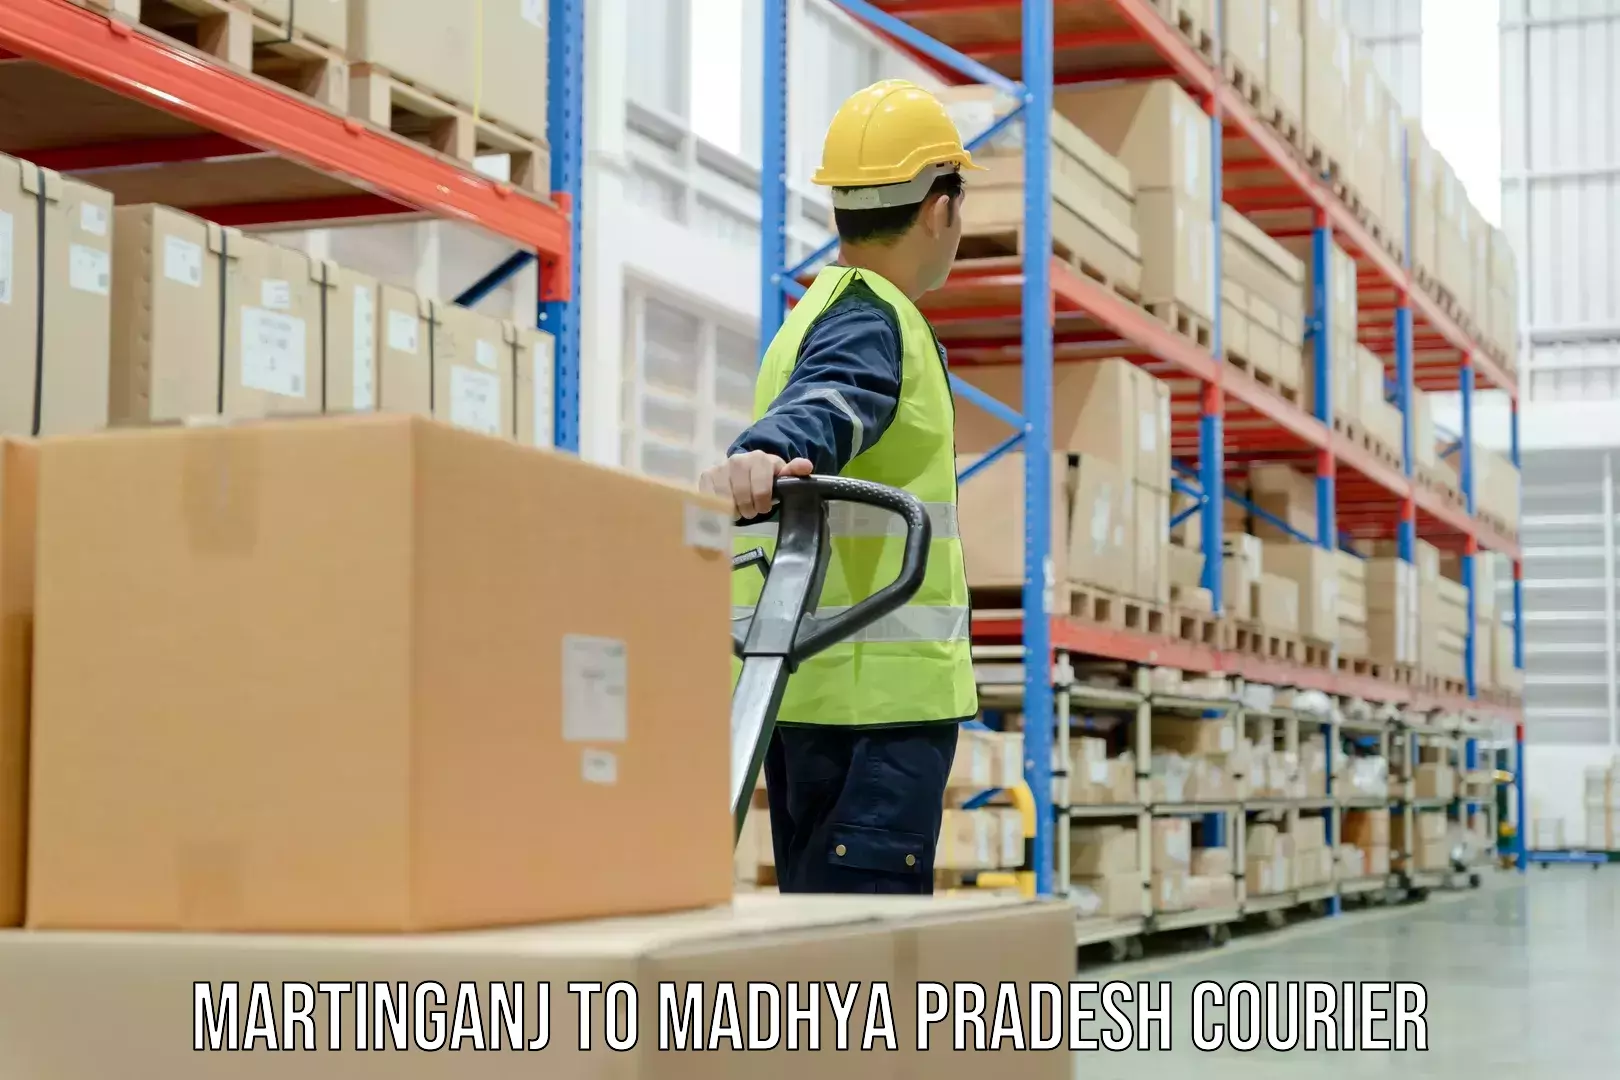 Discount courier rates in Martinganj to Tikamgarh